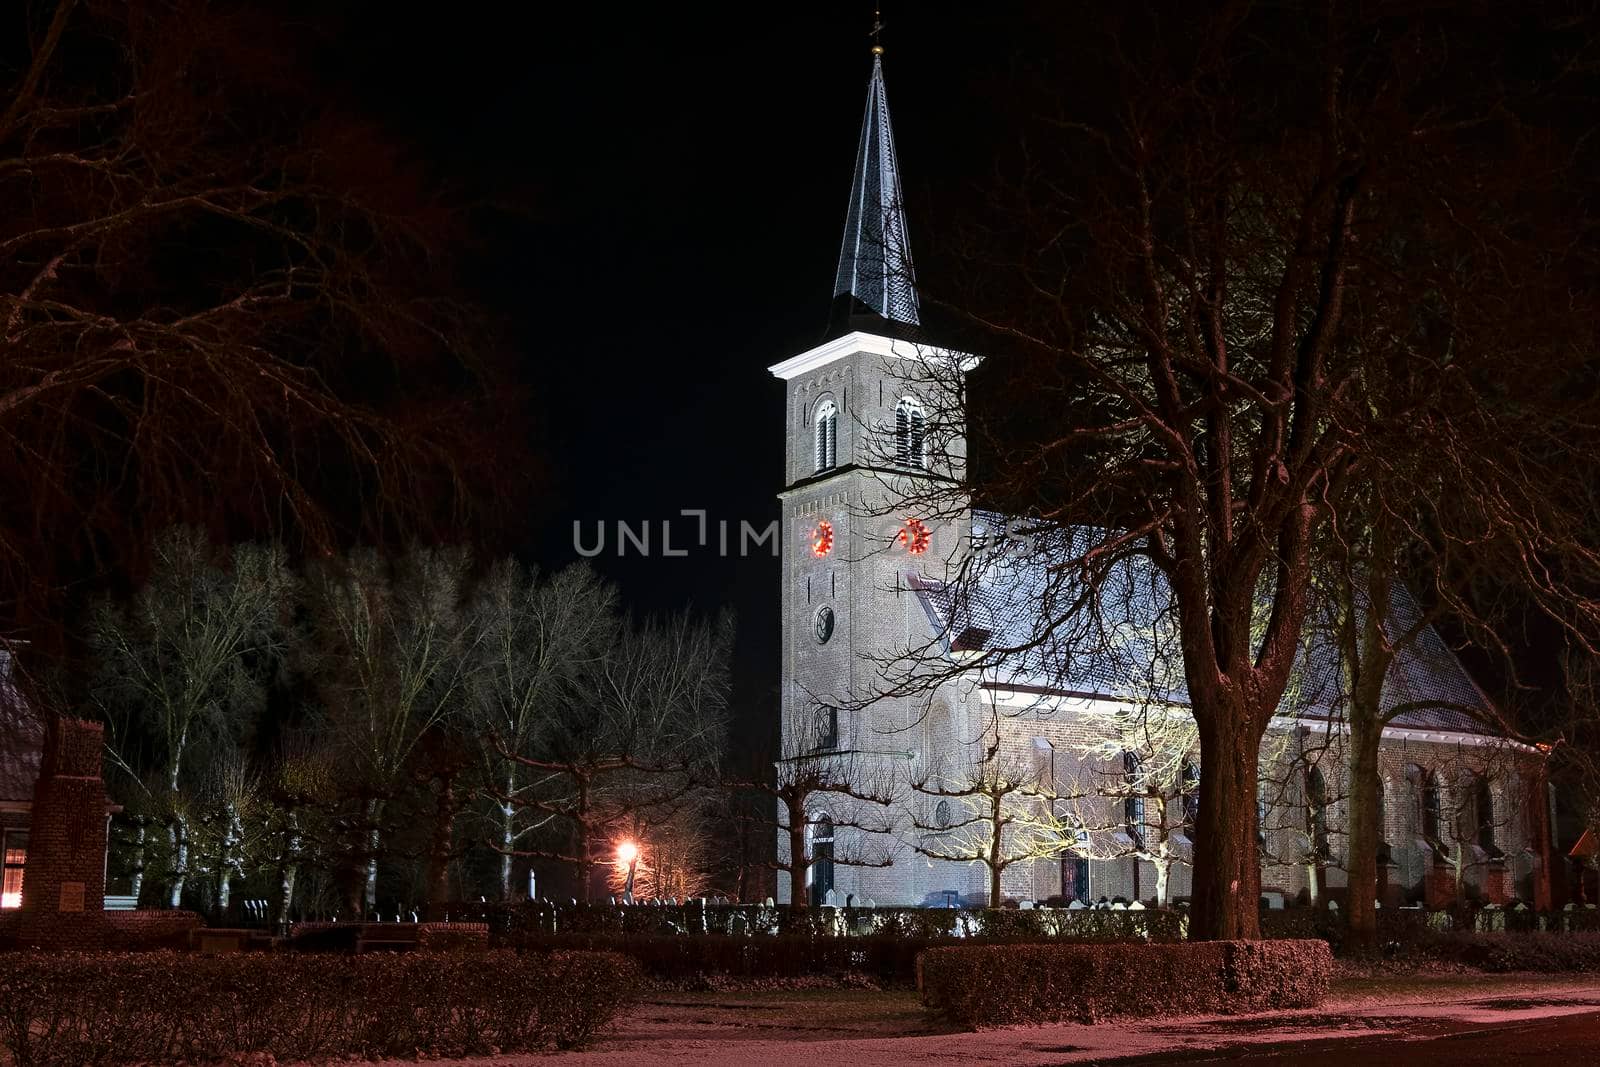 Snowy church from Ternaard in Friesland in the Netherlands at night